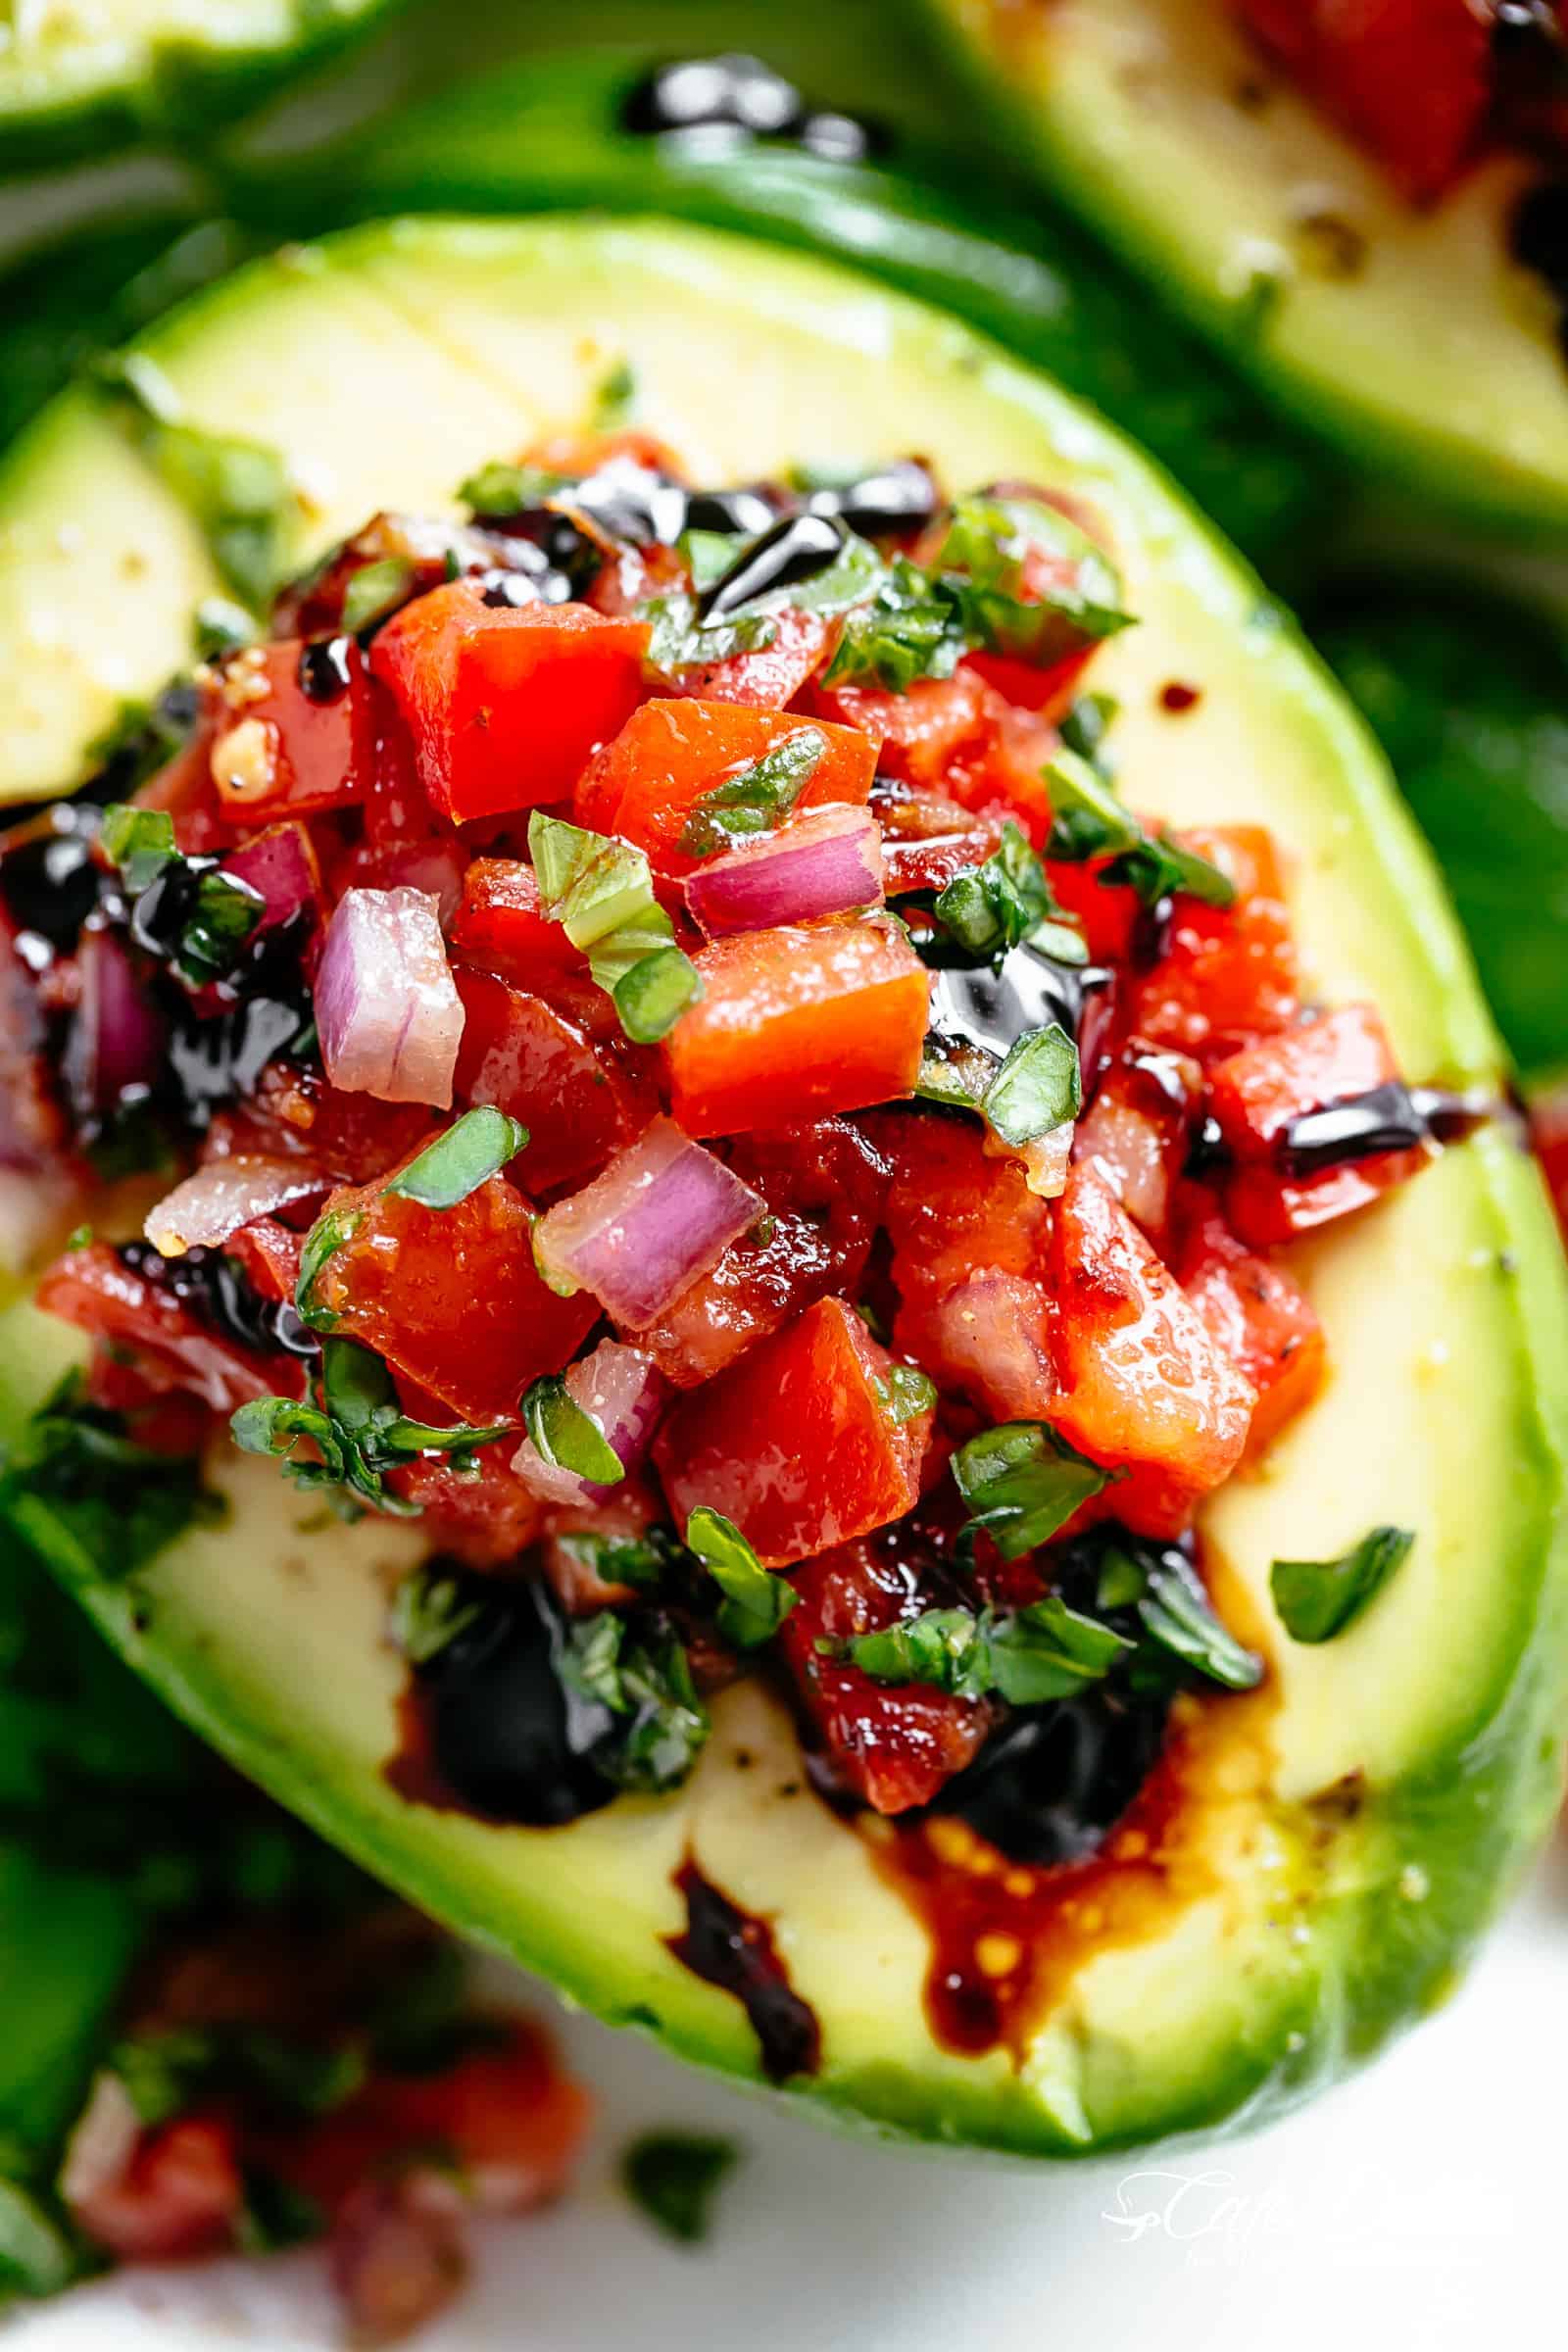 Take creamy avocados to a different level with Bruschetta Stuffed Avocados! Bruschetta tomato stuffed into Avocados with parmesan and a balsamic reduction! | cafedelites.com